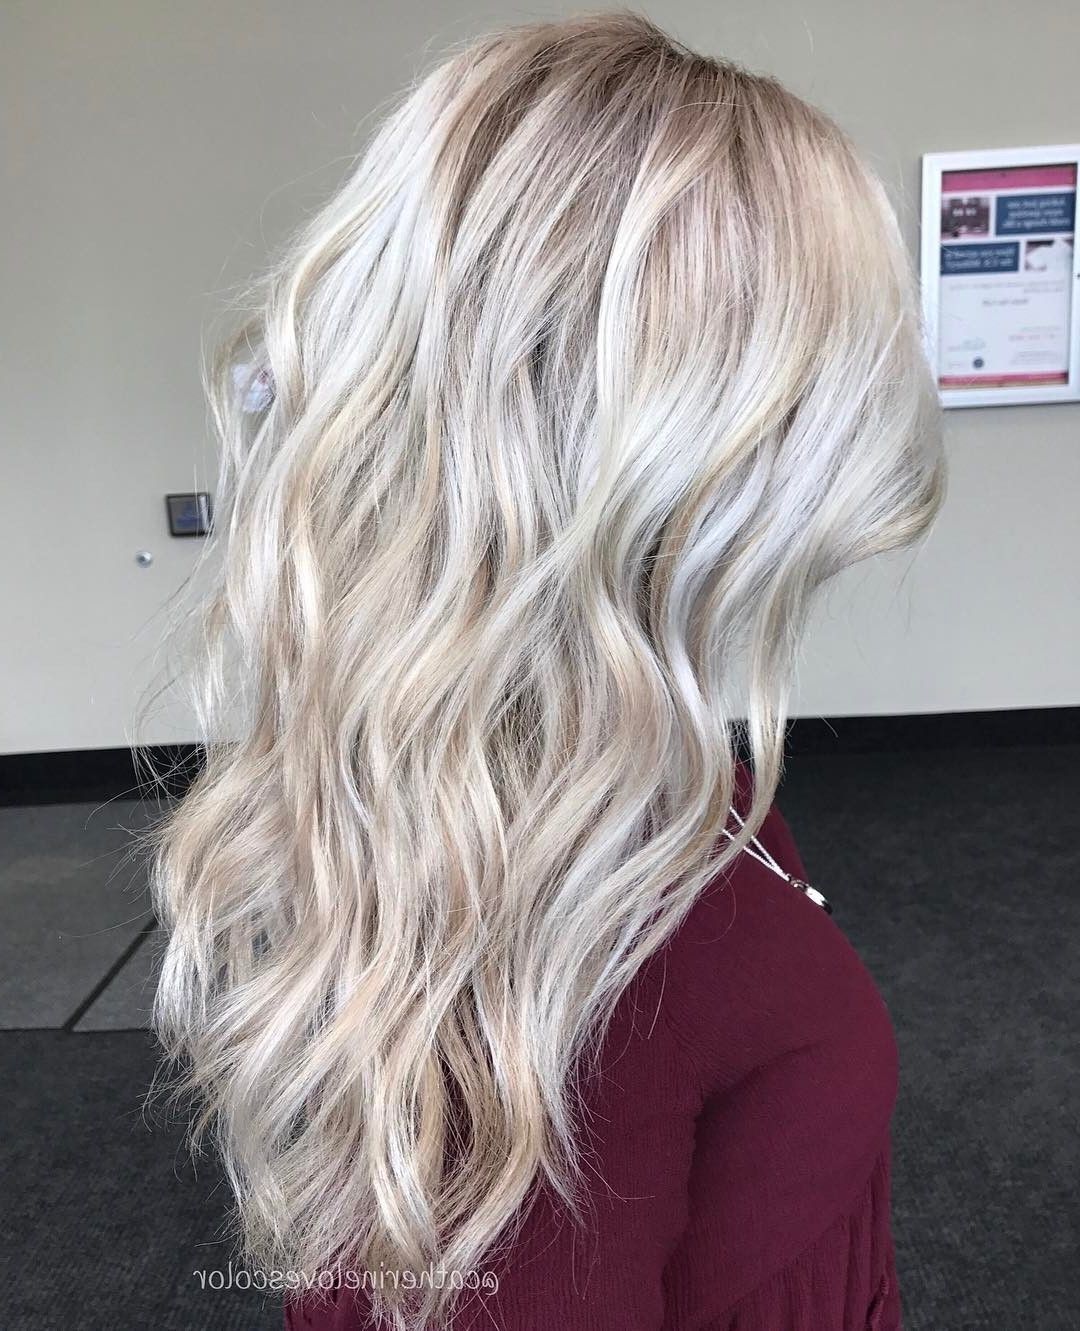 Well Liked Rooty Long Bob Blonde Hairstyles For 20 Adorable Ash Blonde Hairstyles To Try: Hair Color Ideas  (View 11 of 20)